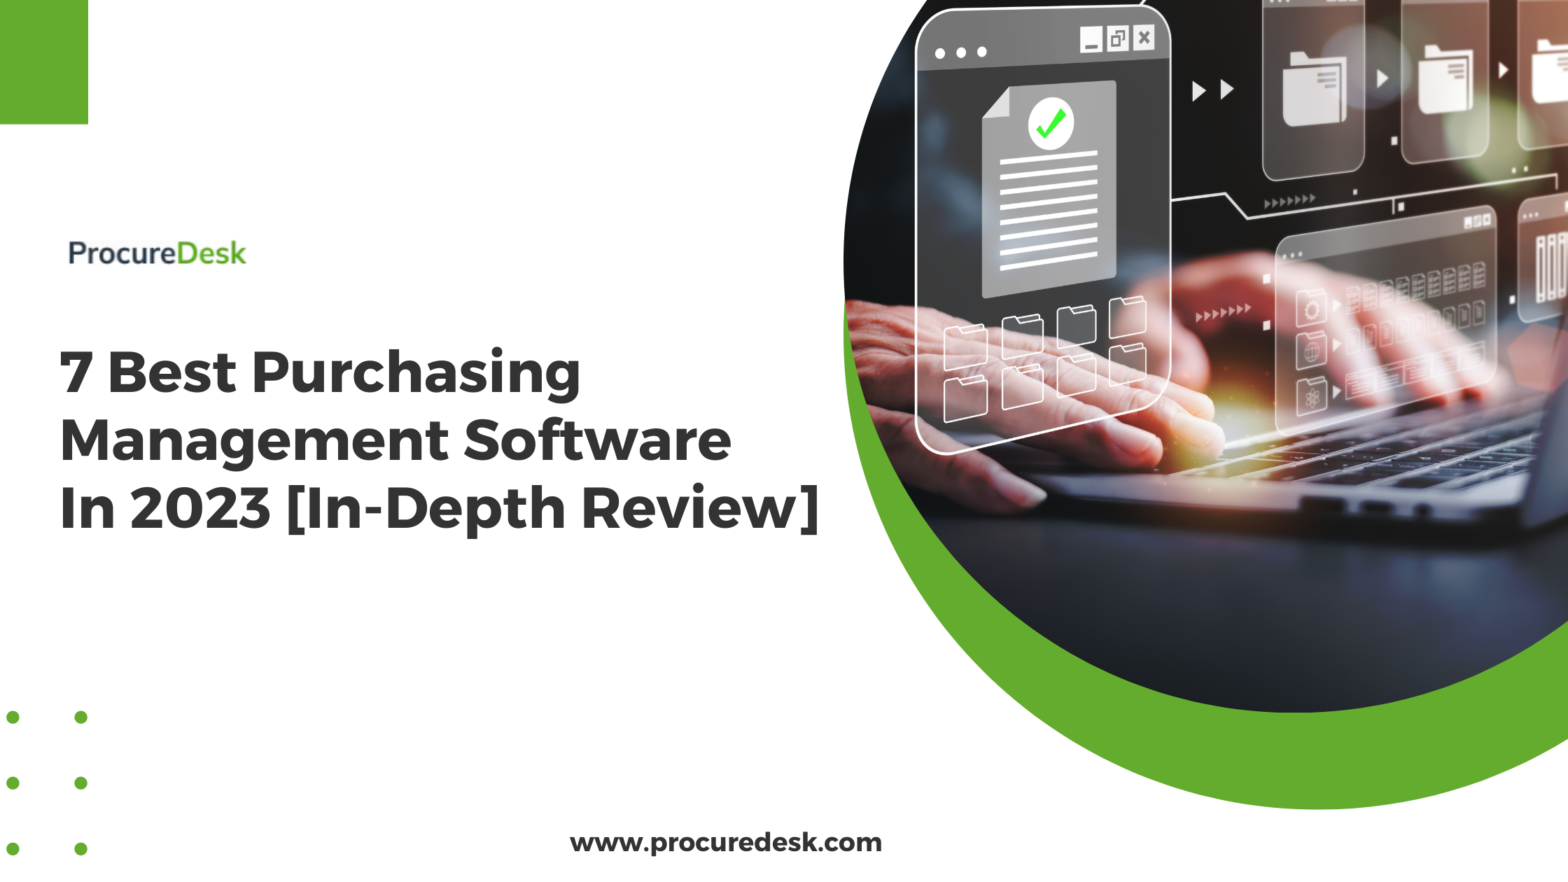 7 Best Purchasing Management Software In 2023